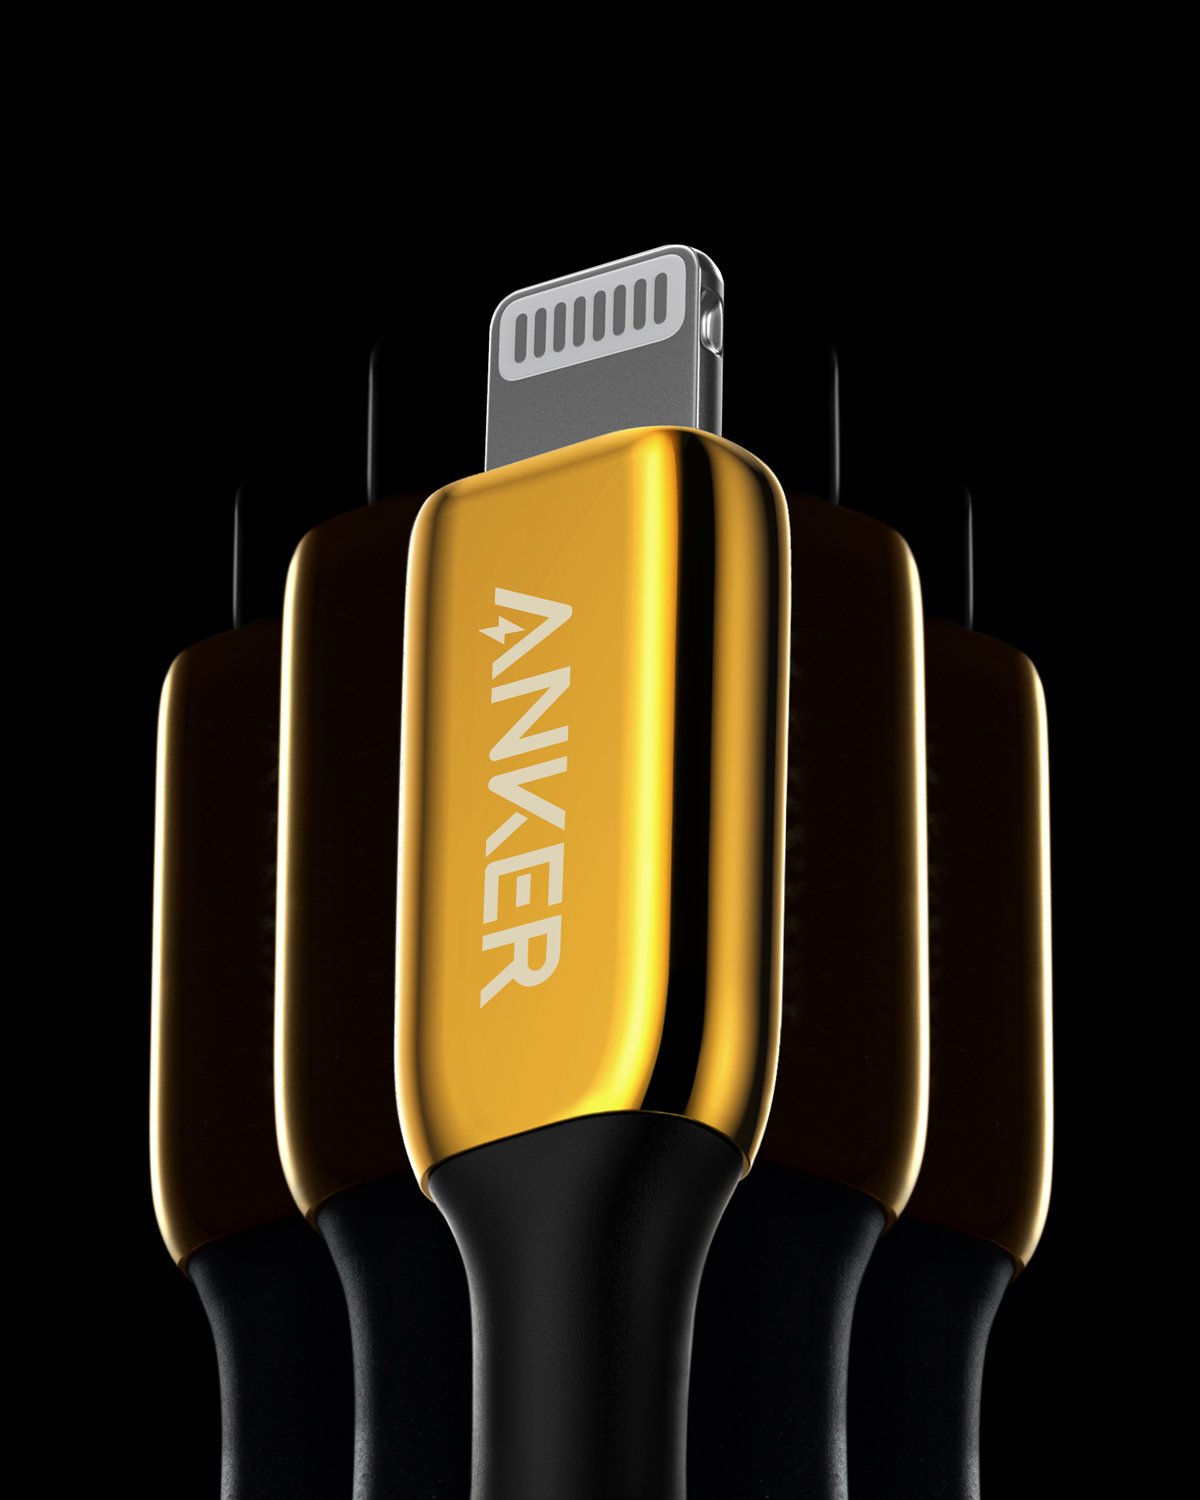 https://www.imore.com/sites/imore.com/files/styles/xlarge/public/field/image/2020/05/anker-powerline-iii-24k-gold-edition-lifestyle-04.jpg?itok=JS2L-fOs